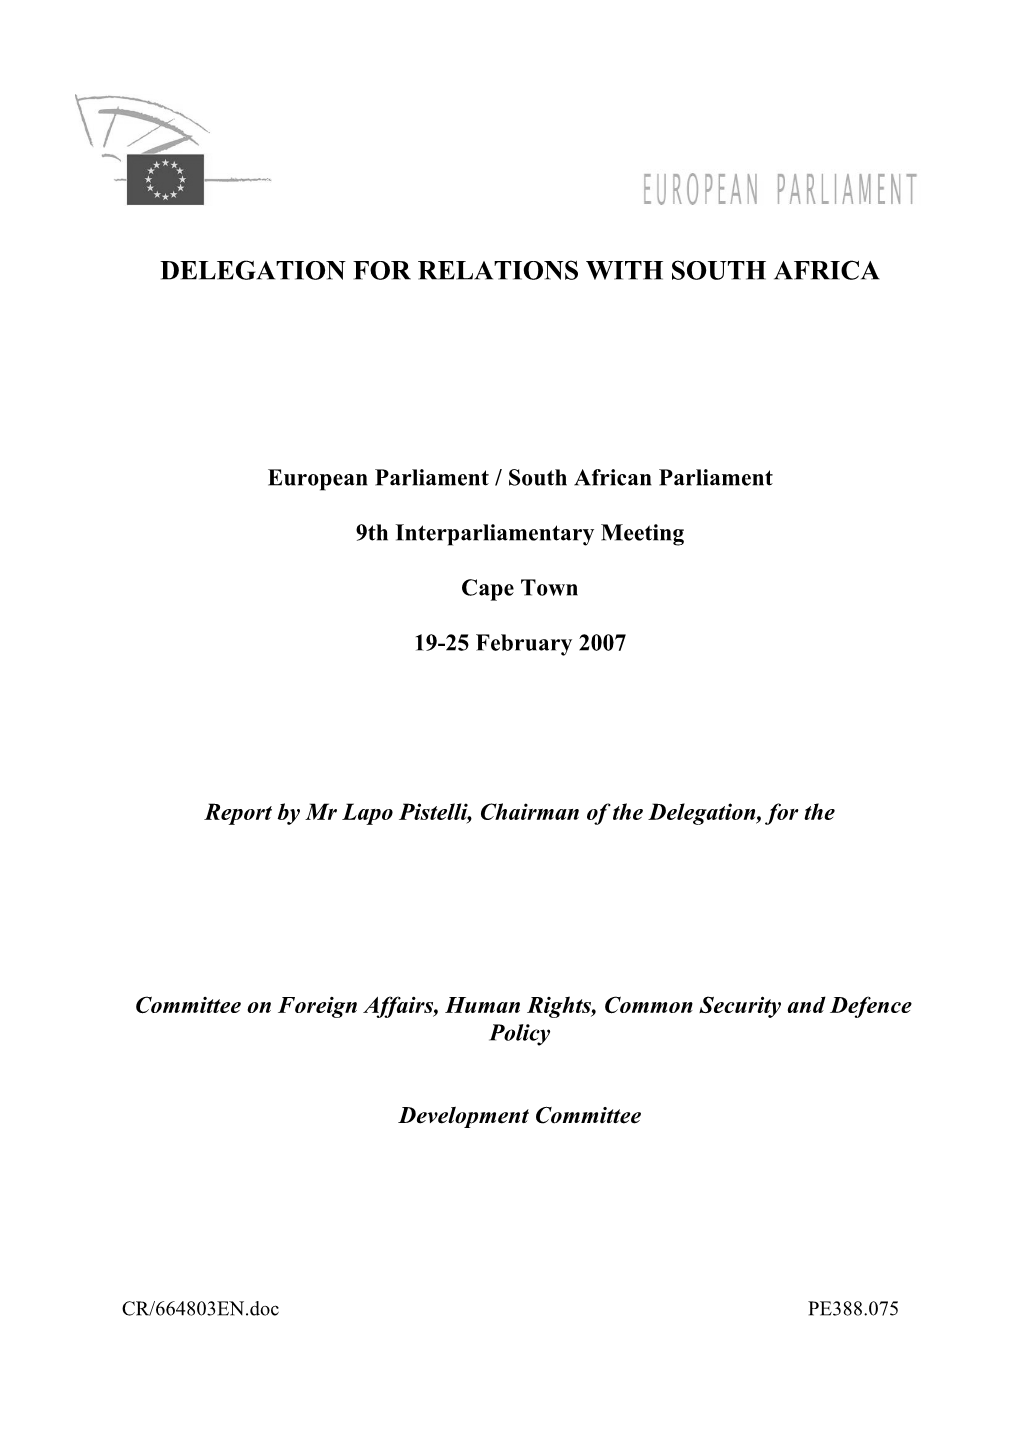 Delegation for Relations with South Africa